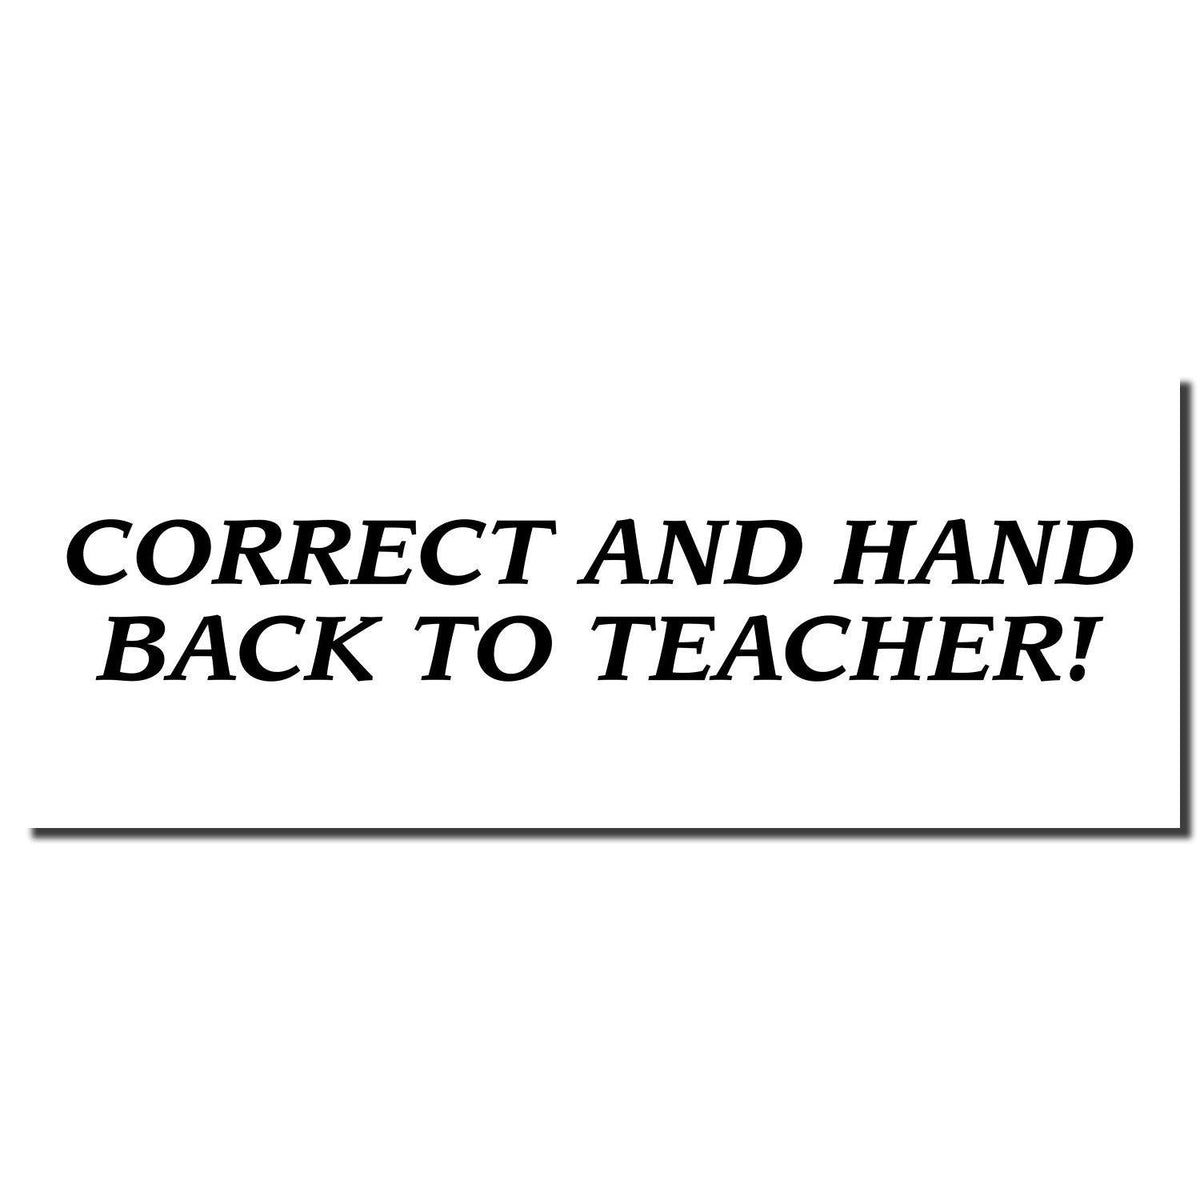 Enlarged Imprint Large Correct And Hand Back To Teacher Rubber Stamp Sample